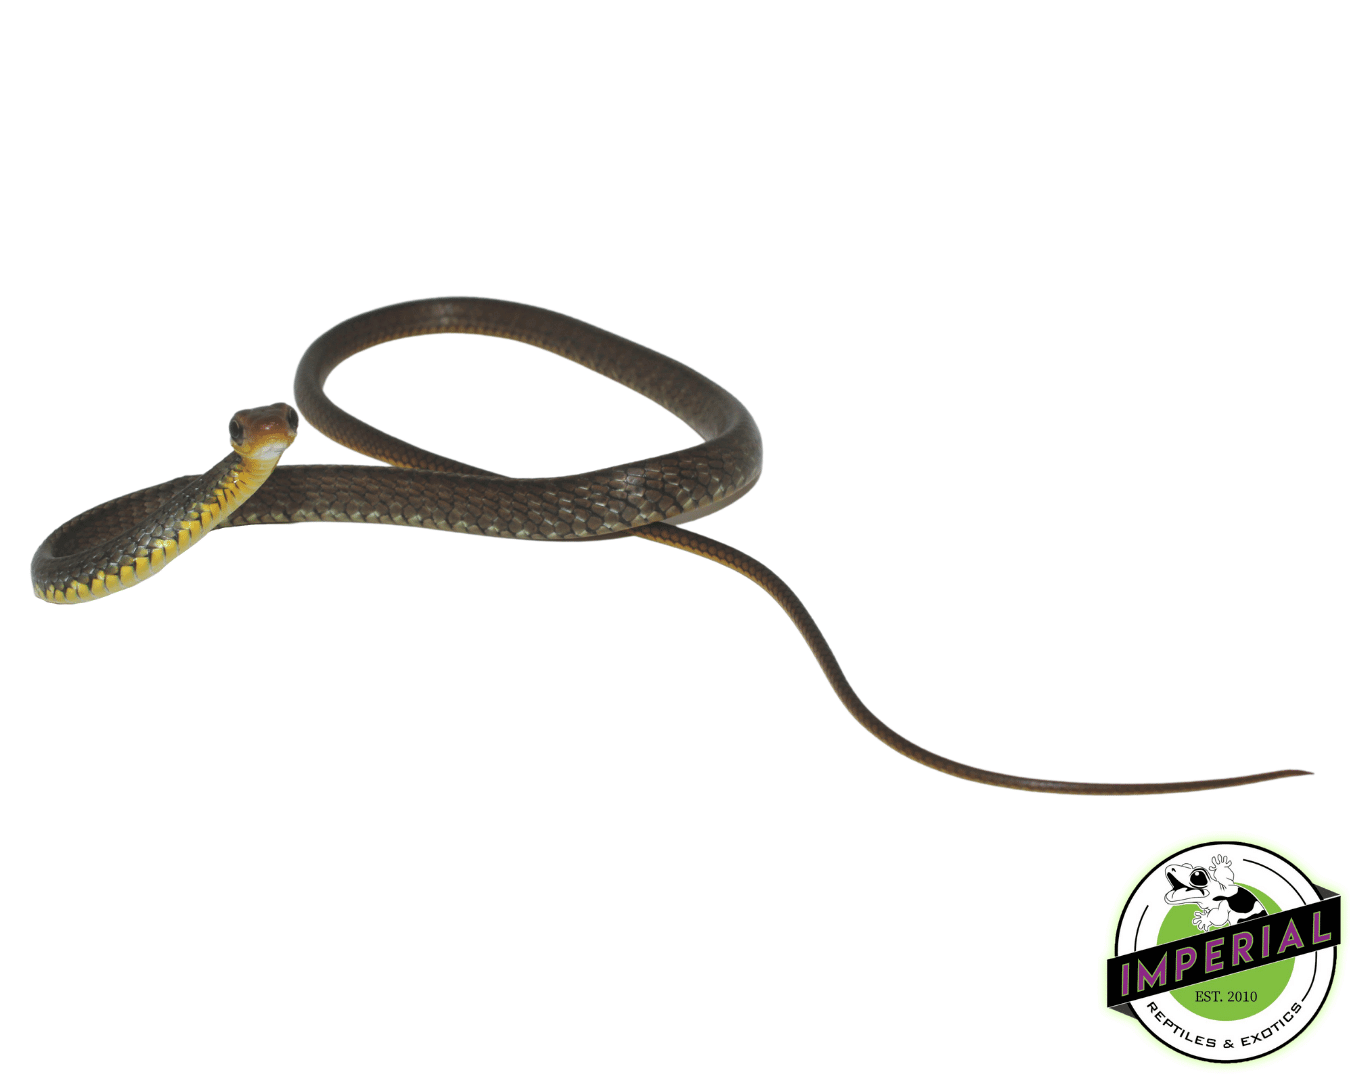 machete snake for sale, buy reptiles online at cheap prices